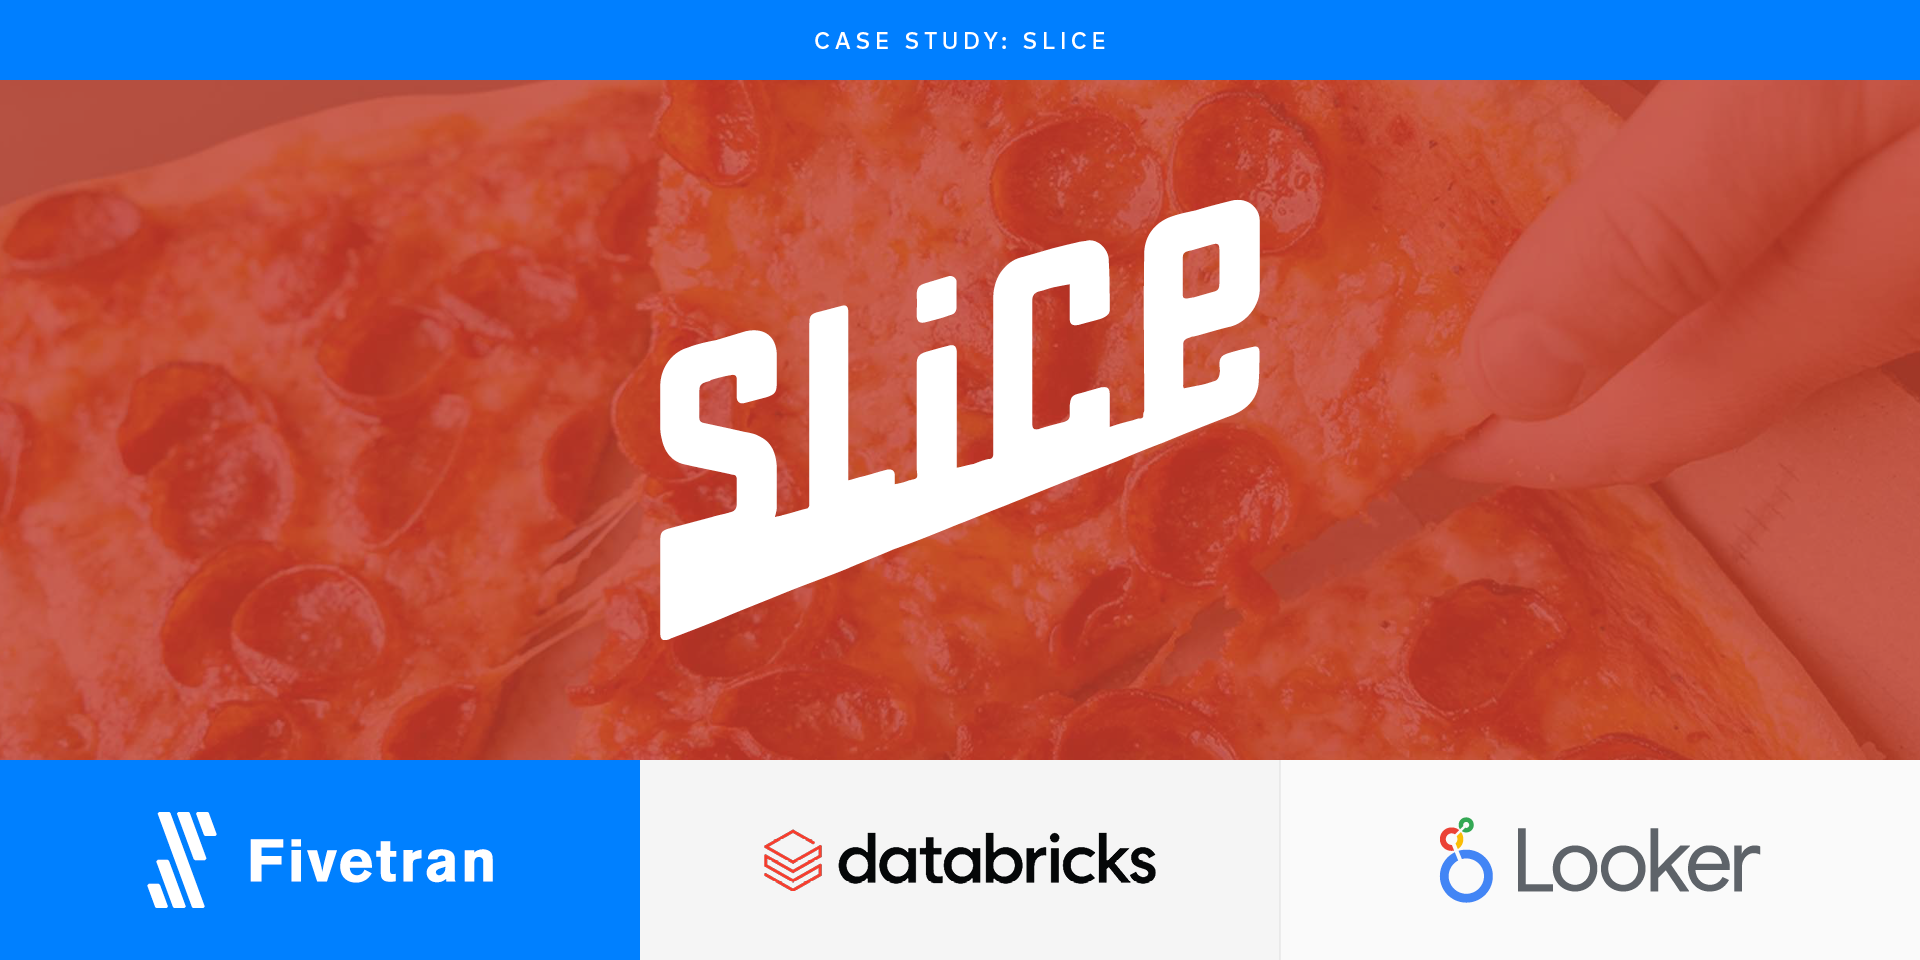 Slice brings machine learning to pizza